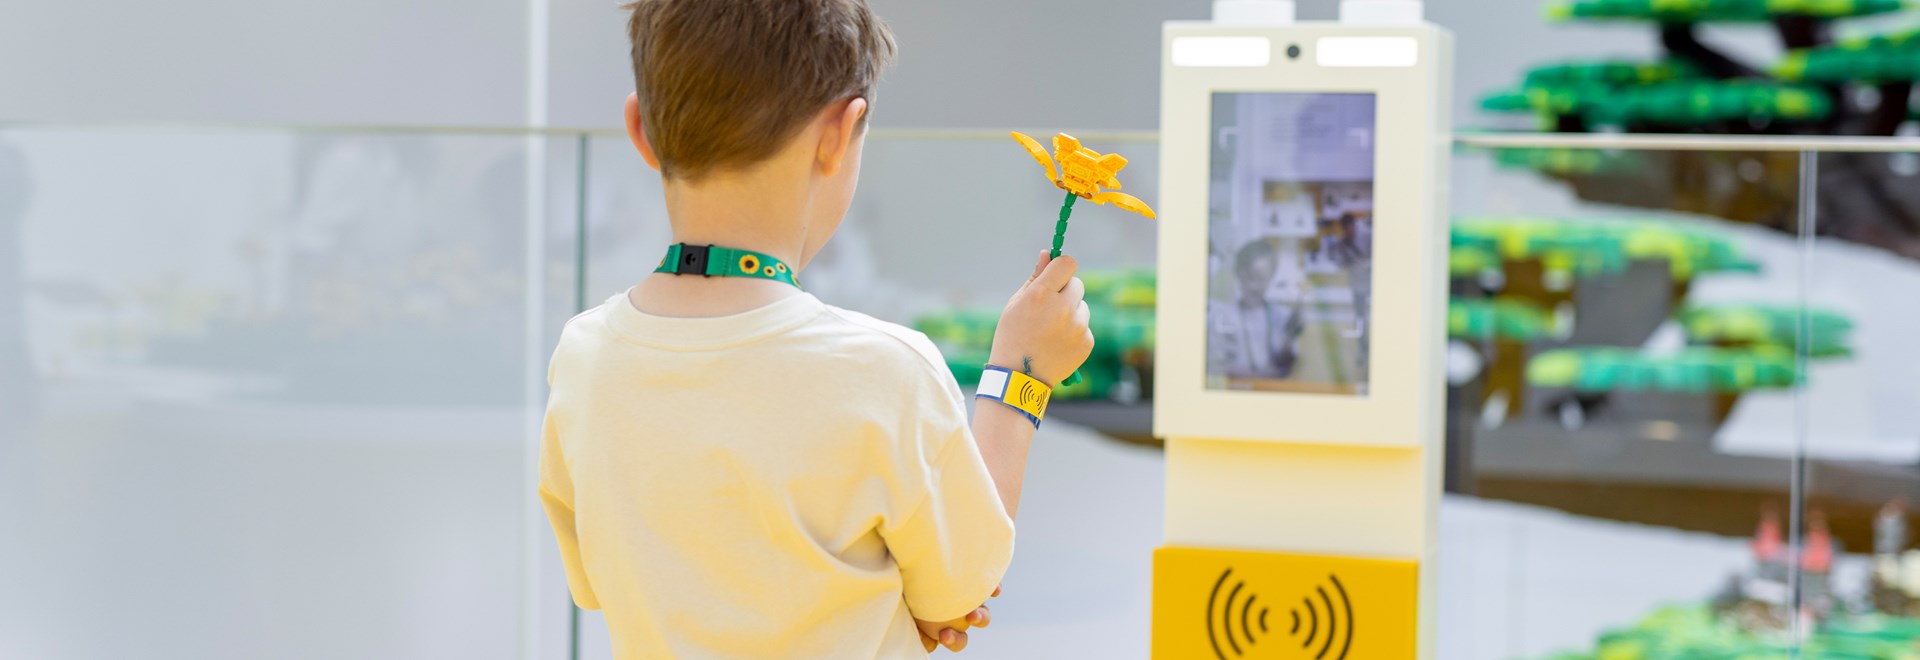 Scan your wristband and bring your LEGO to life